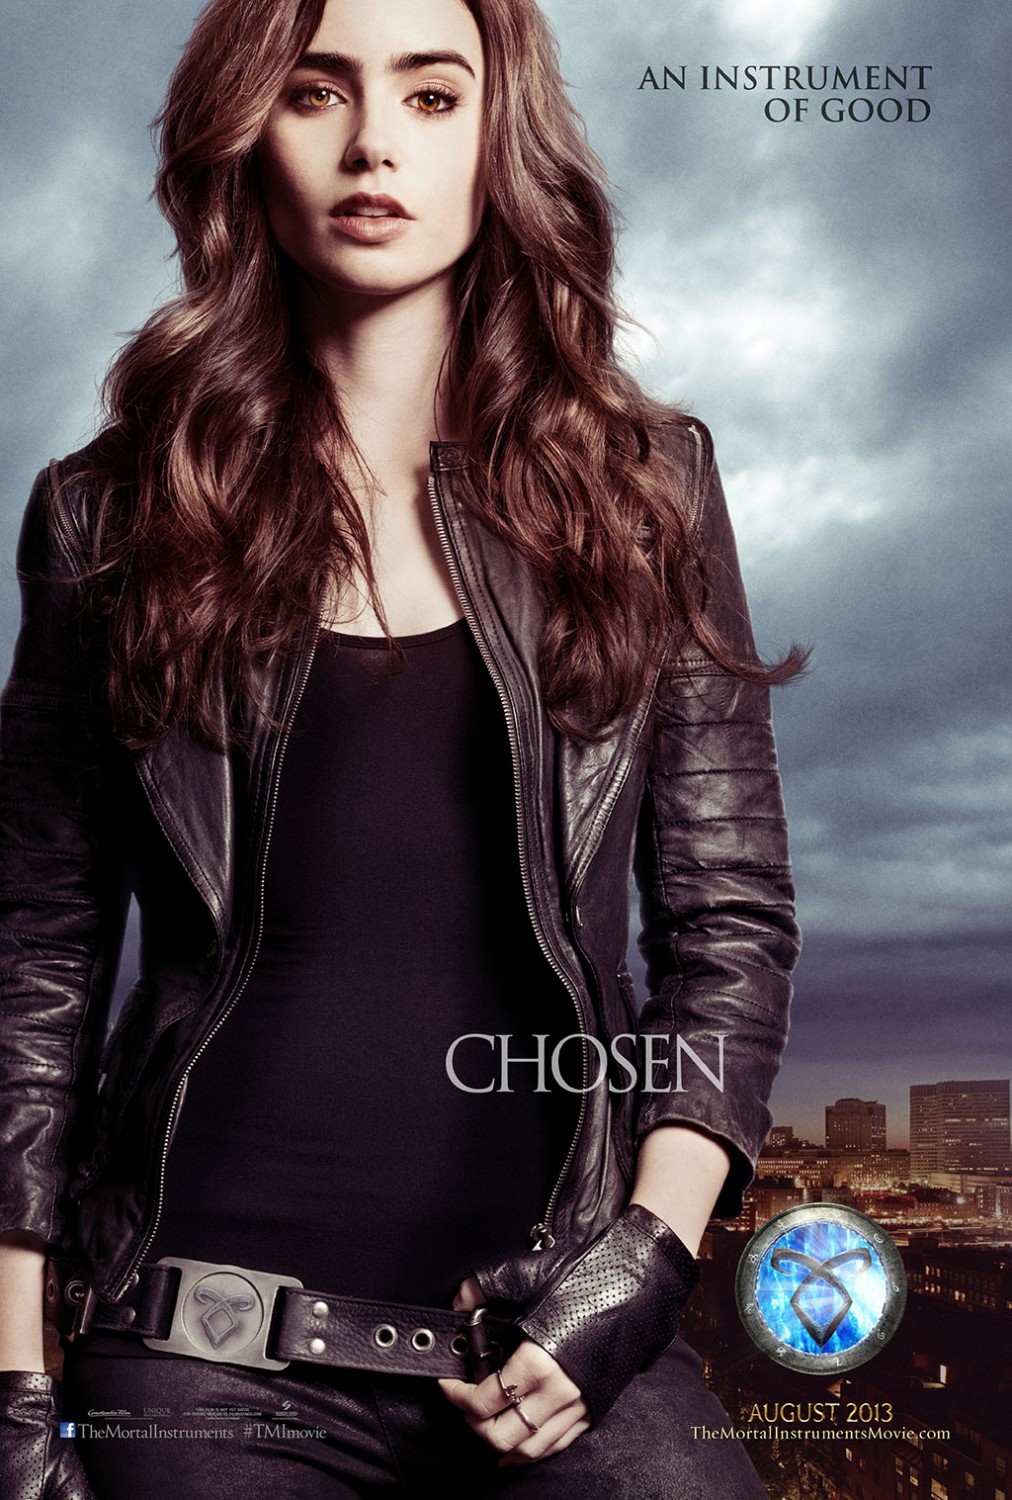 http://www.my-sf.com/wp-content/uploads/2014/05/The-Mortal-Instruments-City-of-Bones-poster.jpg